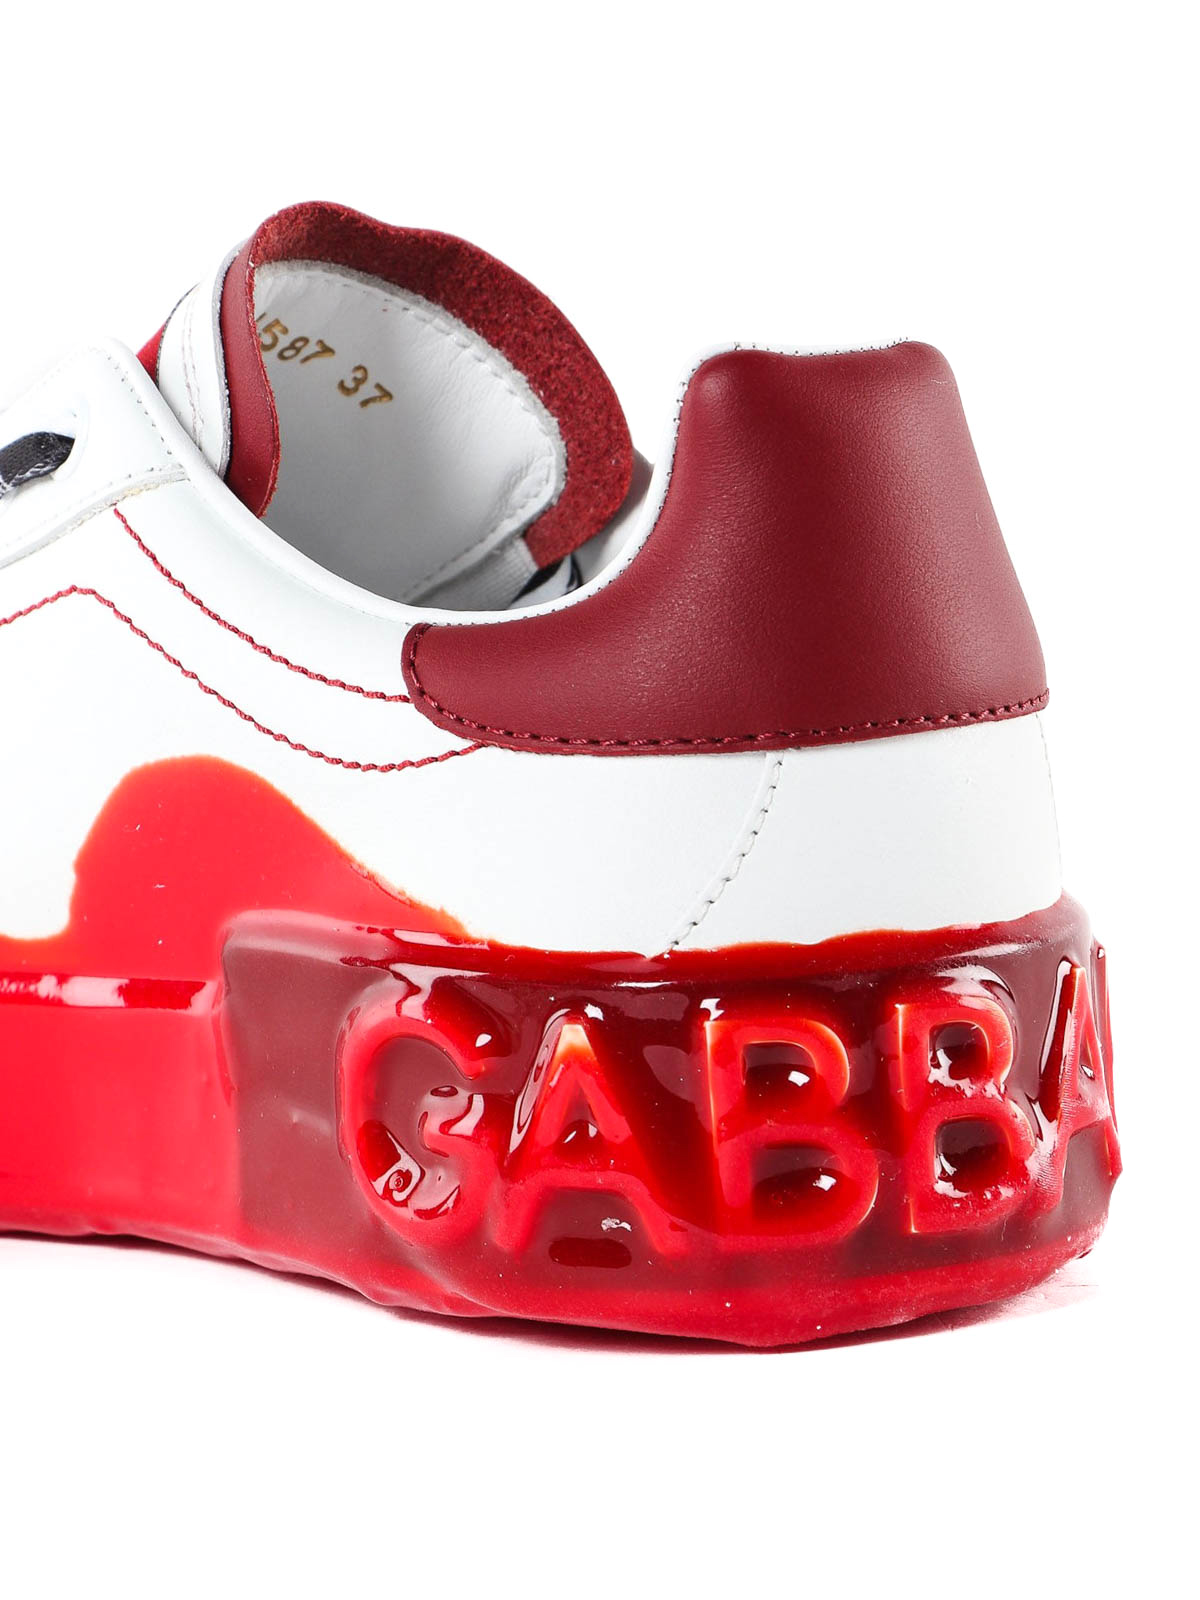 dolce gabbana shoes red and white